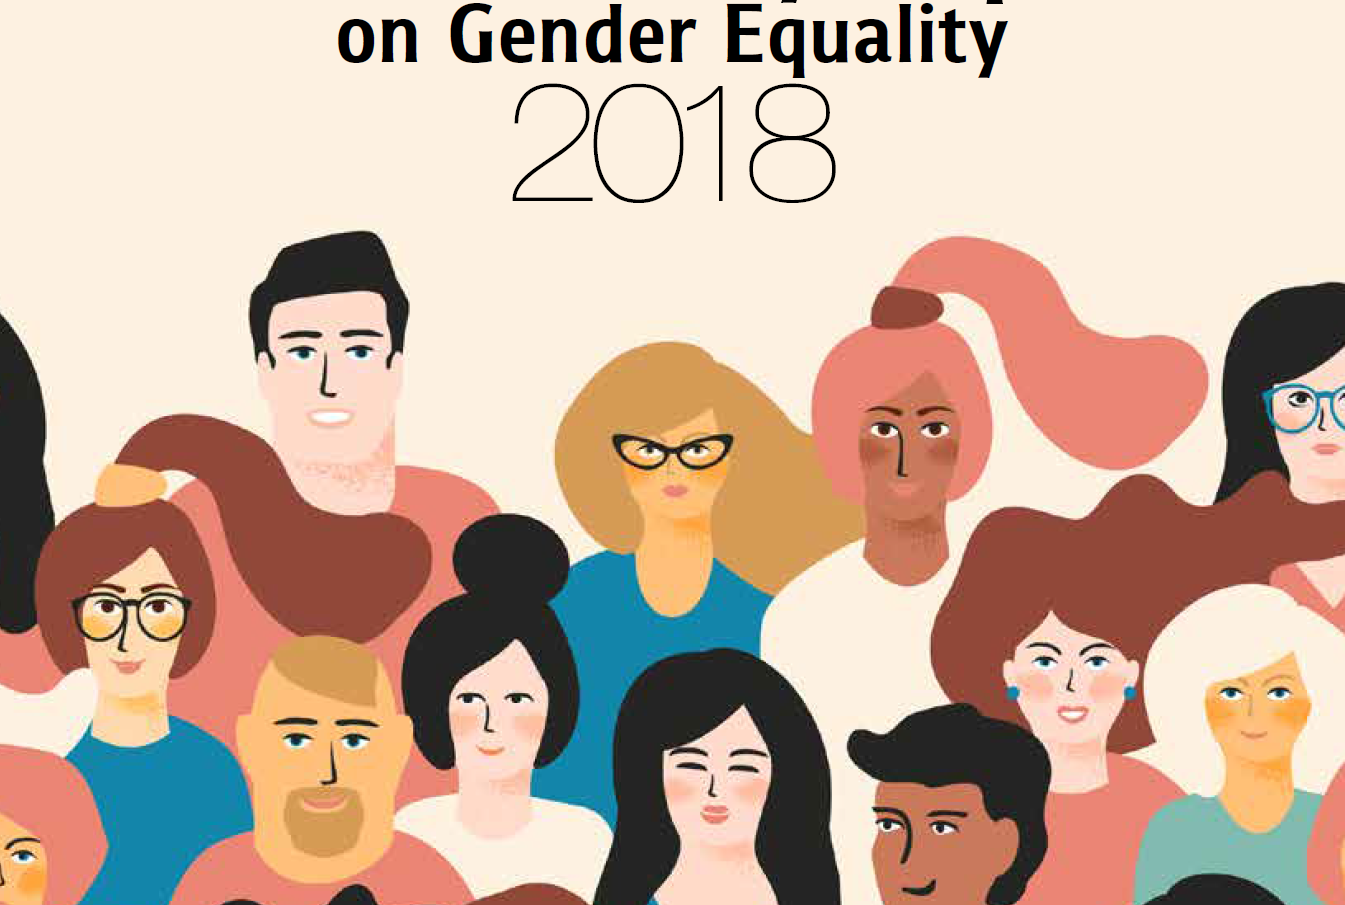 Chula S Sustainability Report On Gender Equality 2018 Chulalongkorn